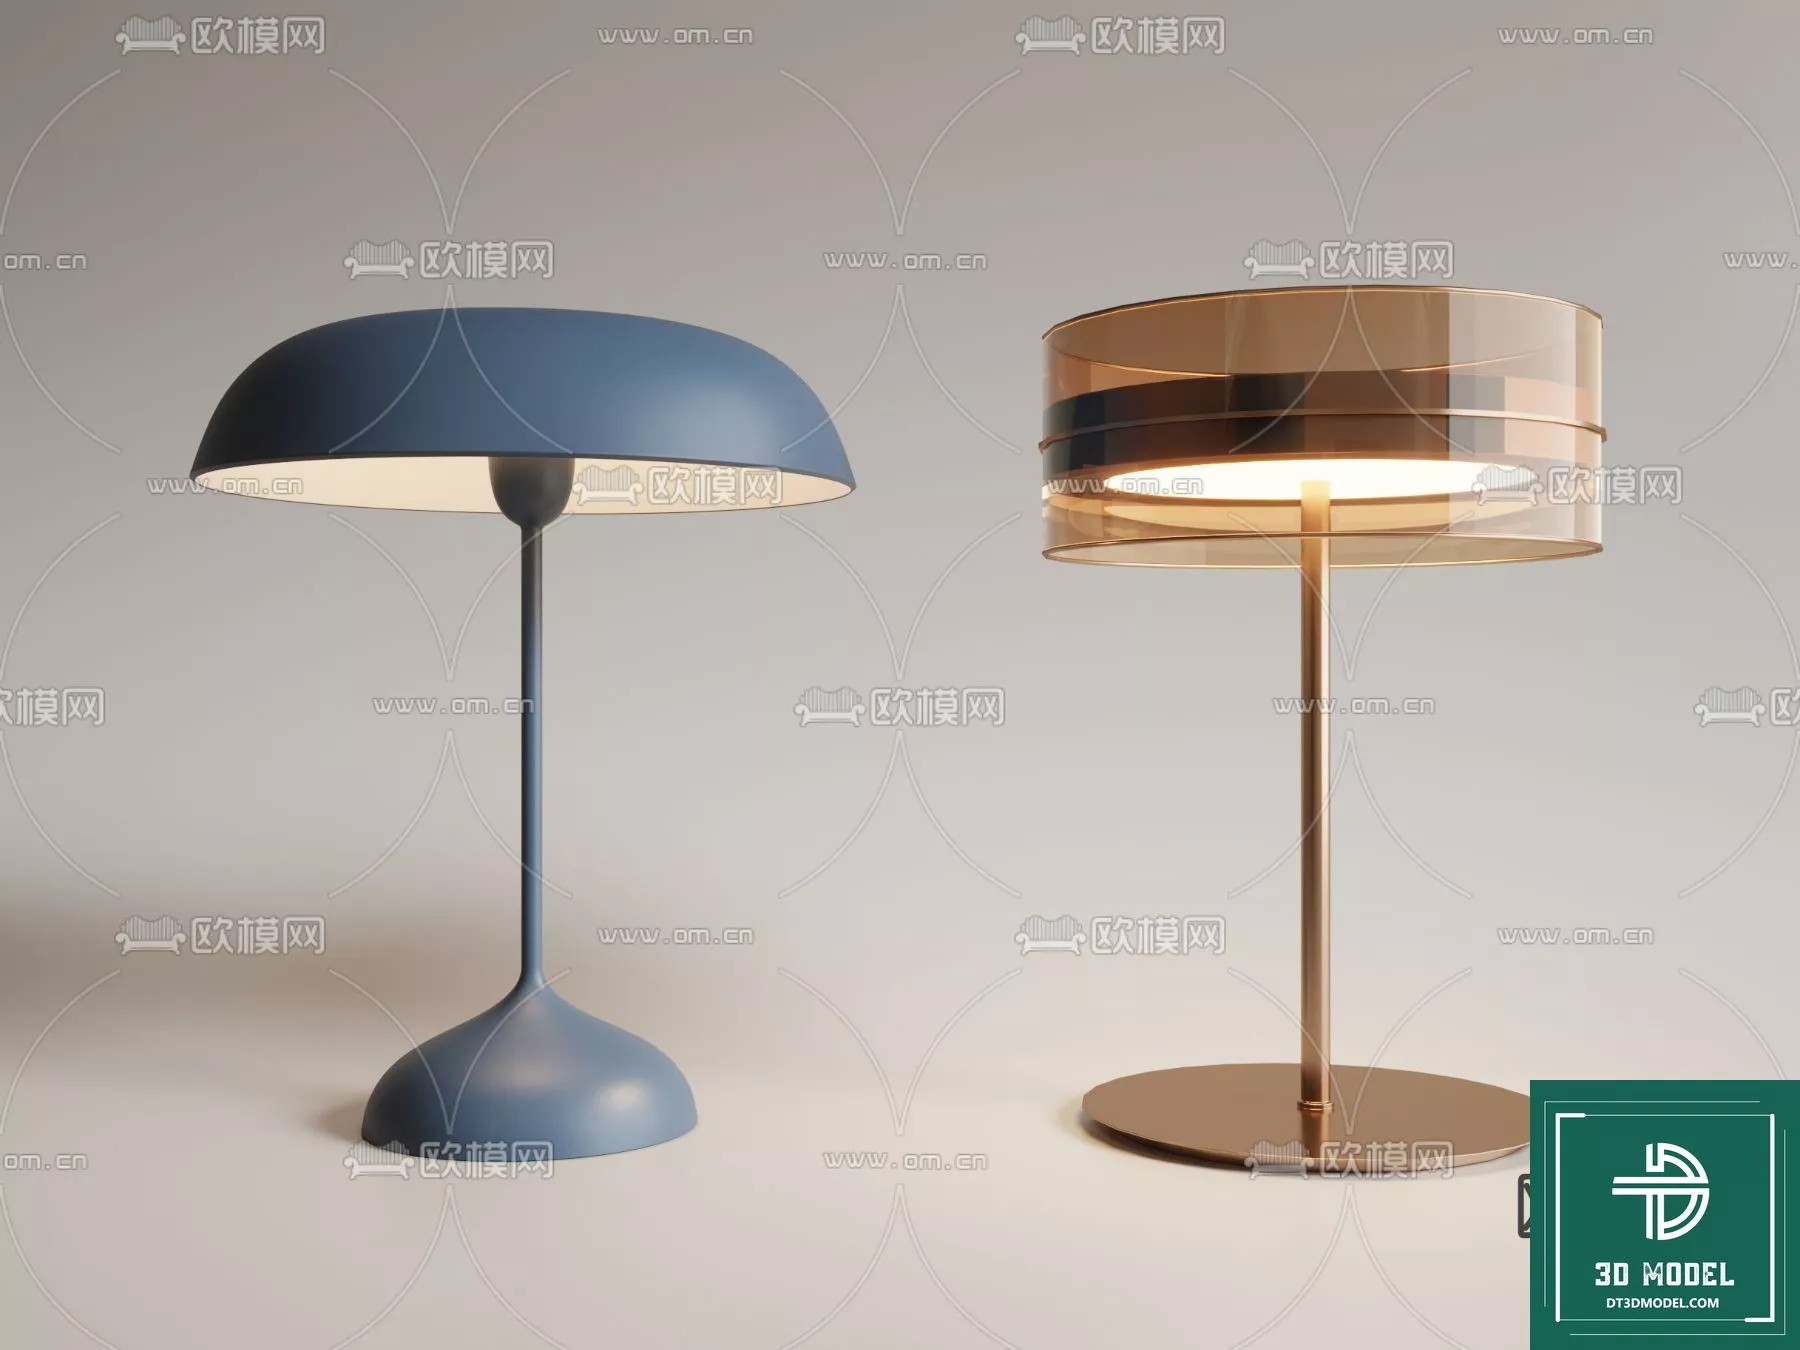 MODERN TABLE LAMP - SKETCHUP 3D MODEL - VRAY OR ENSCAPE - ID14643